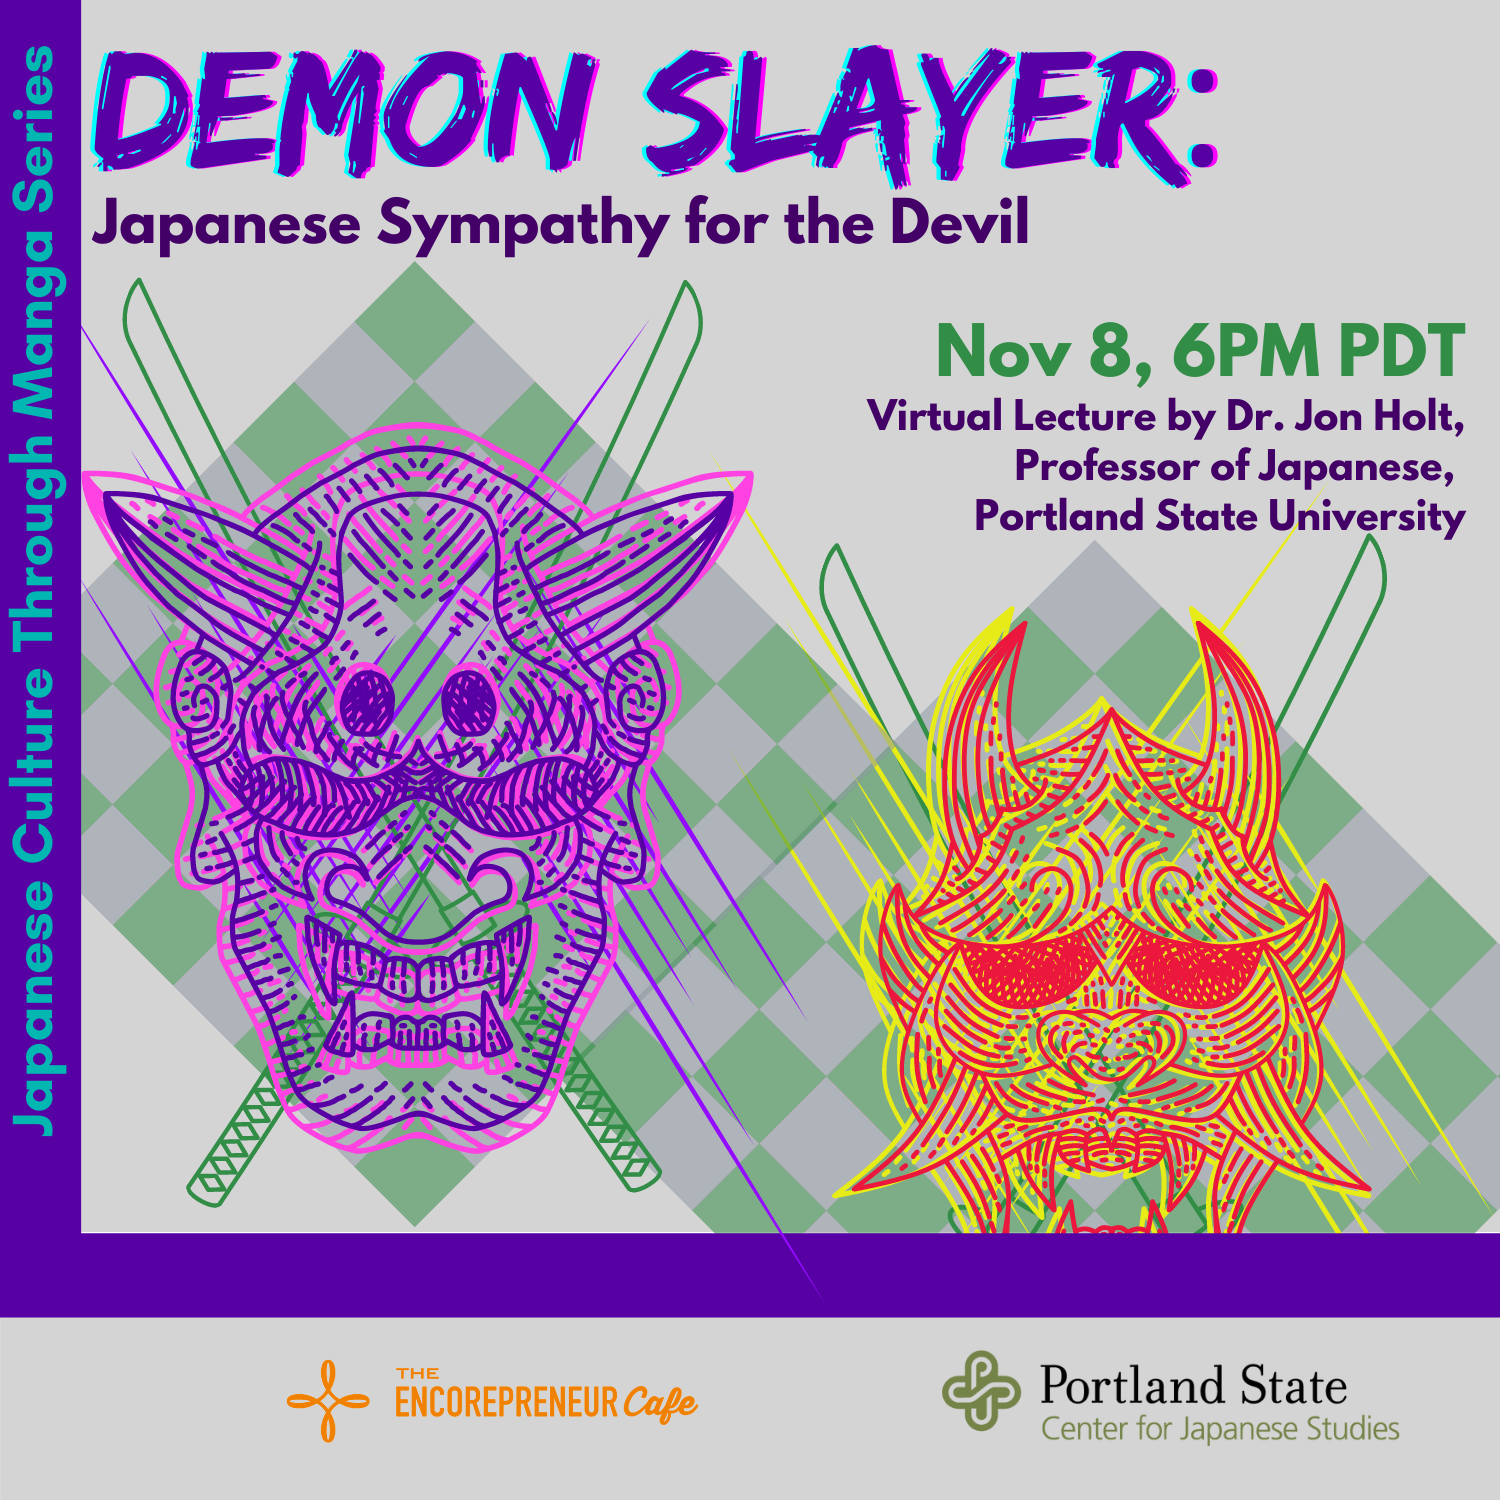 event flyer showing two demon heads on a background of green and grey checkered pattern